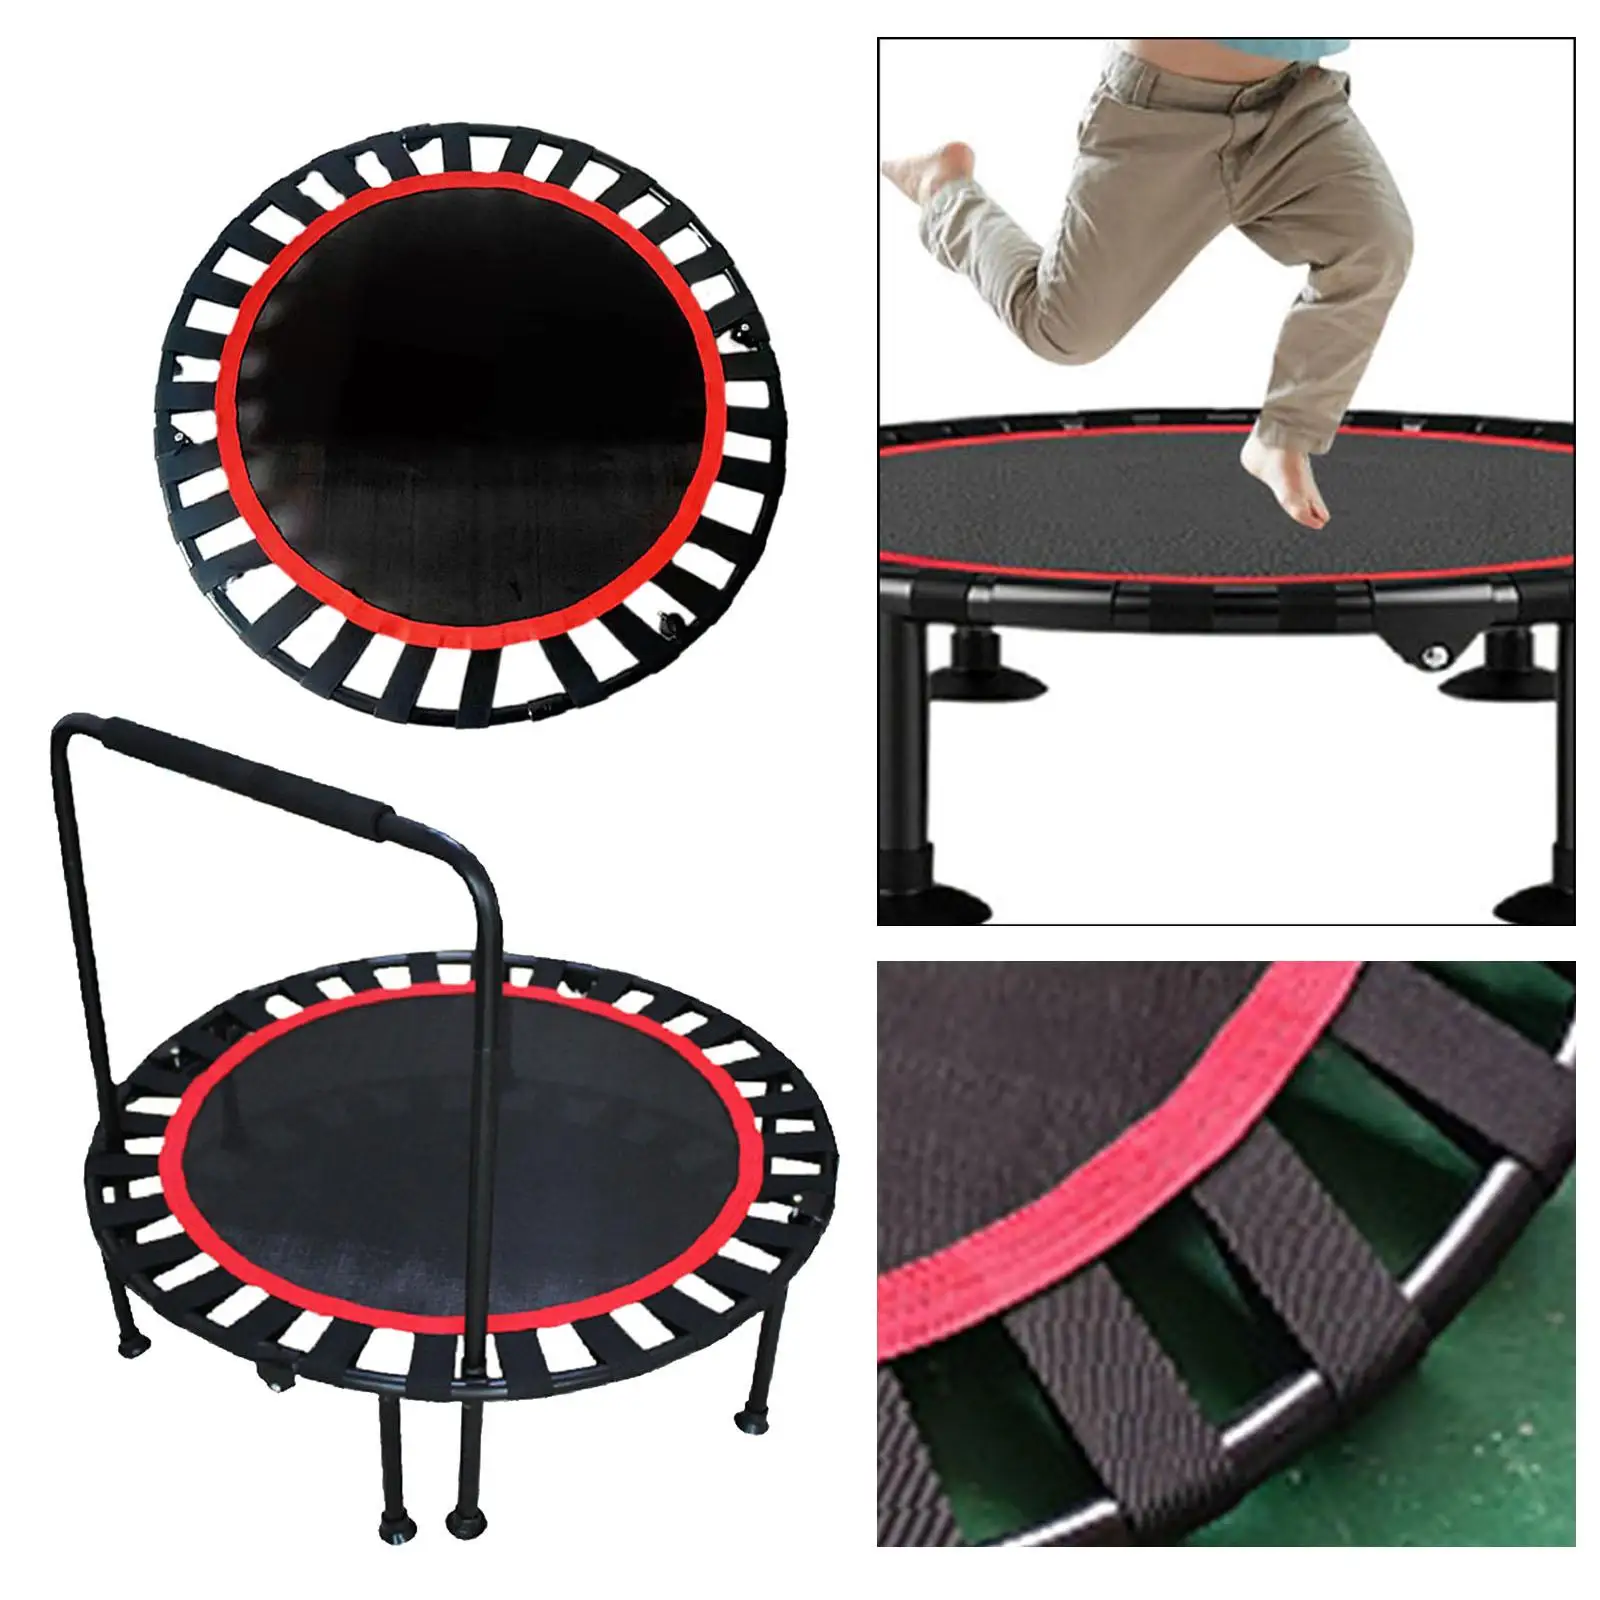 Jumping Mats Fitness Long Lasting Safety Toy Boy Girl Kids Round Trampoline